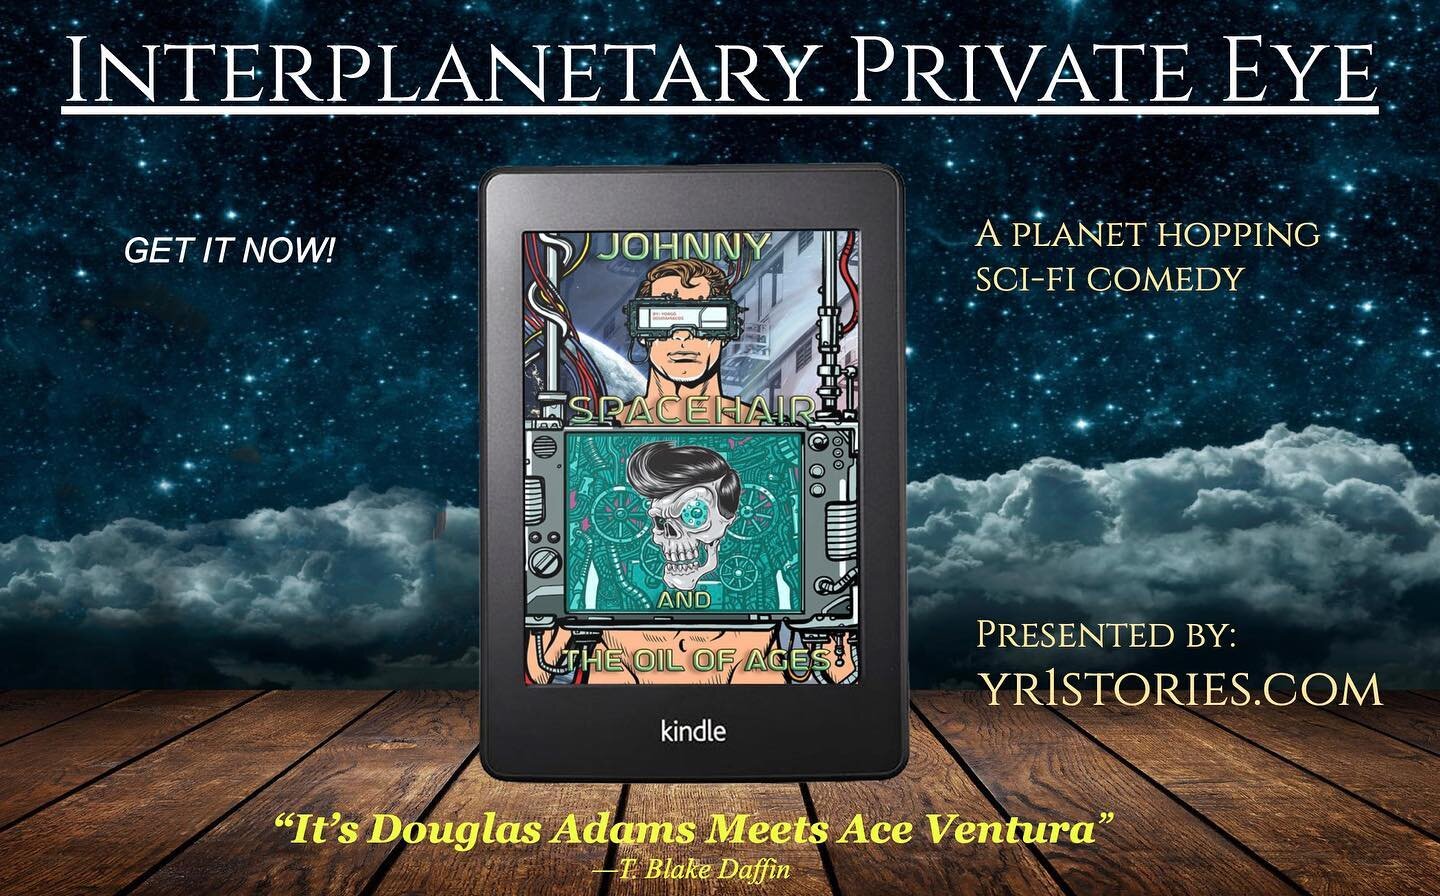 High energy sci-fi comedy, unlike anything you&rsquo;ve ever read!
A short read at a fast pace with tons of odd ball ideas and zany laughs.
Available through most ebook outlets.
Link in bio.

#atompunk #scificomedy #raypunk
#steampunk #ebook #science